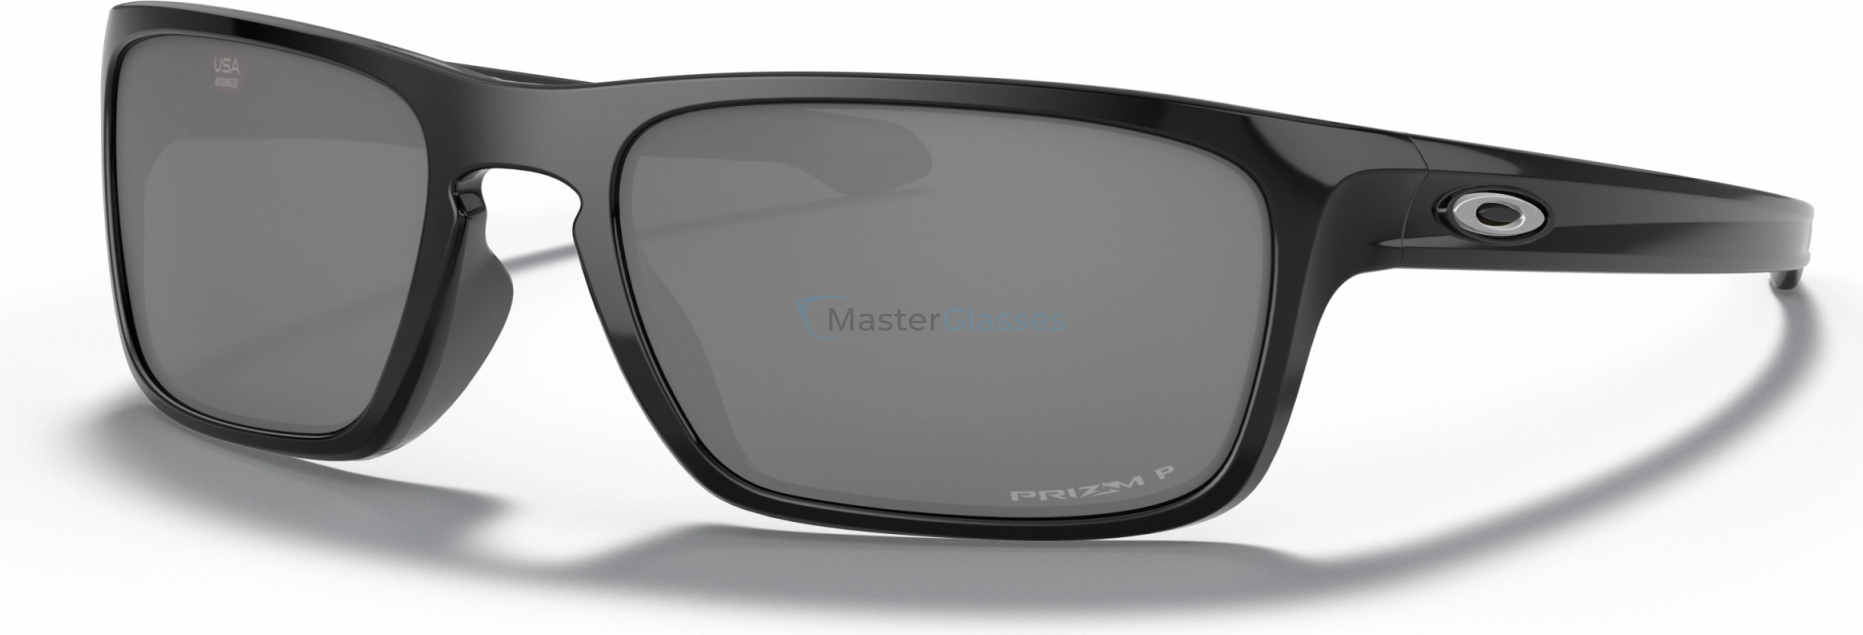 Oakley Sliver Stealth OO9408-05 Polarized